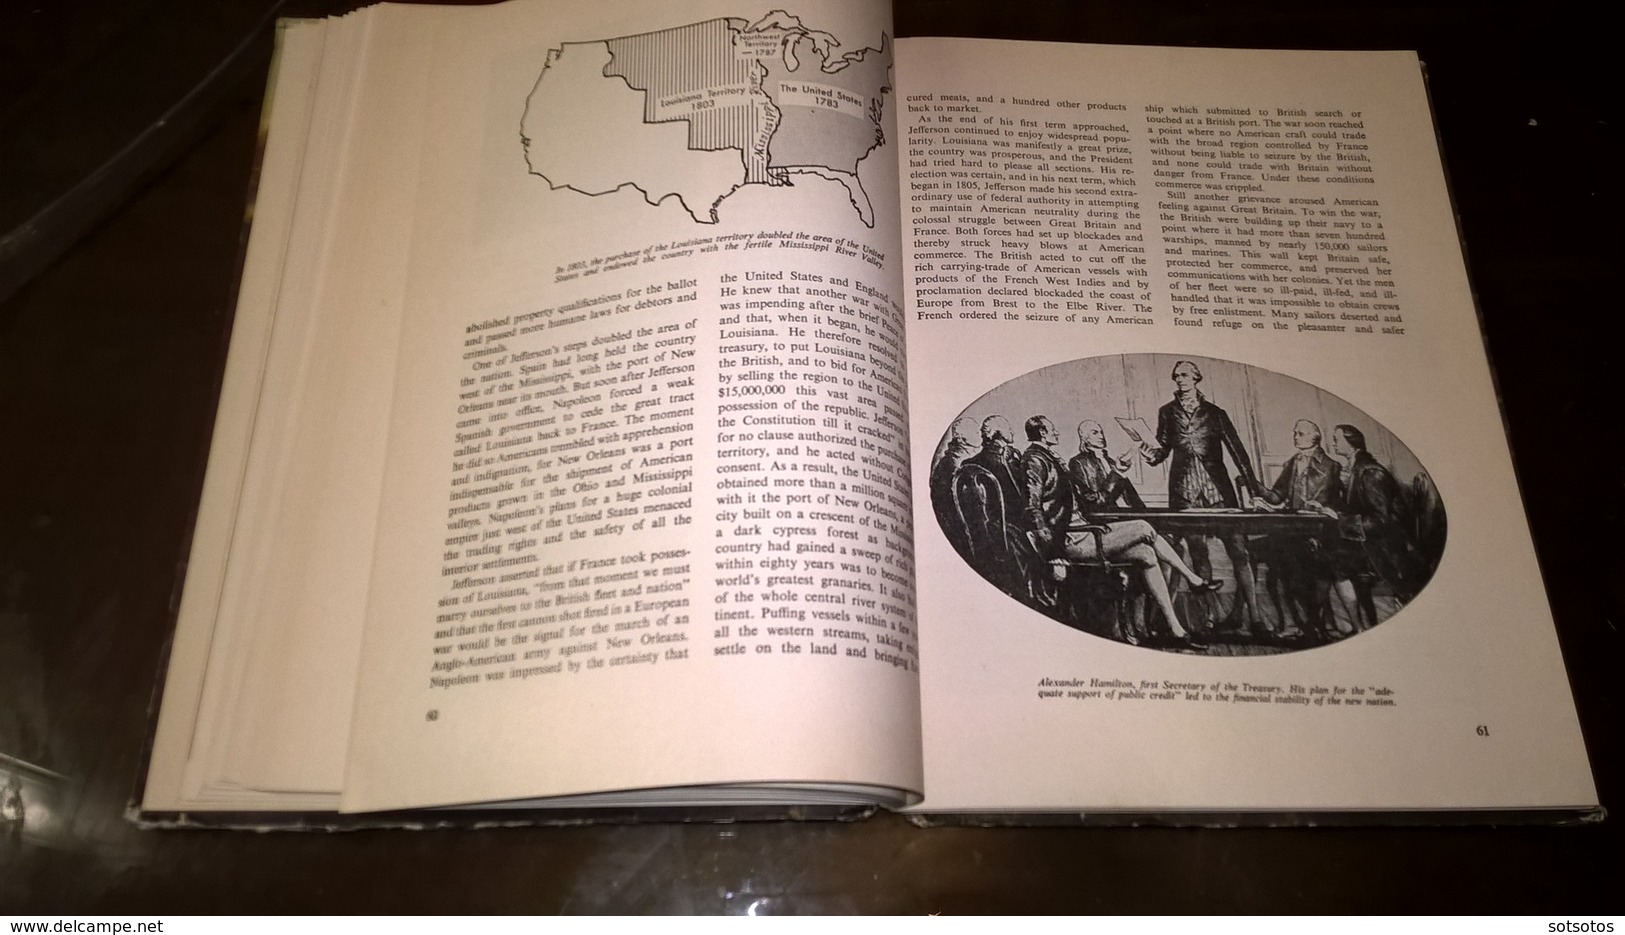 An Outline of American History - 1953, 148 pgs (19Χ25 cent) - Illustrated